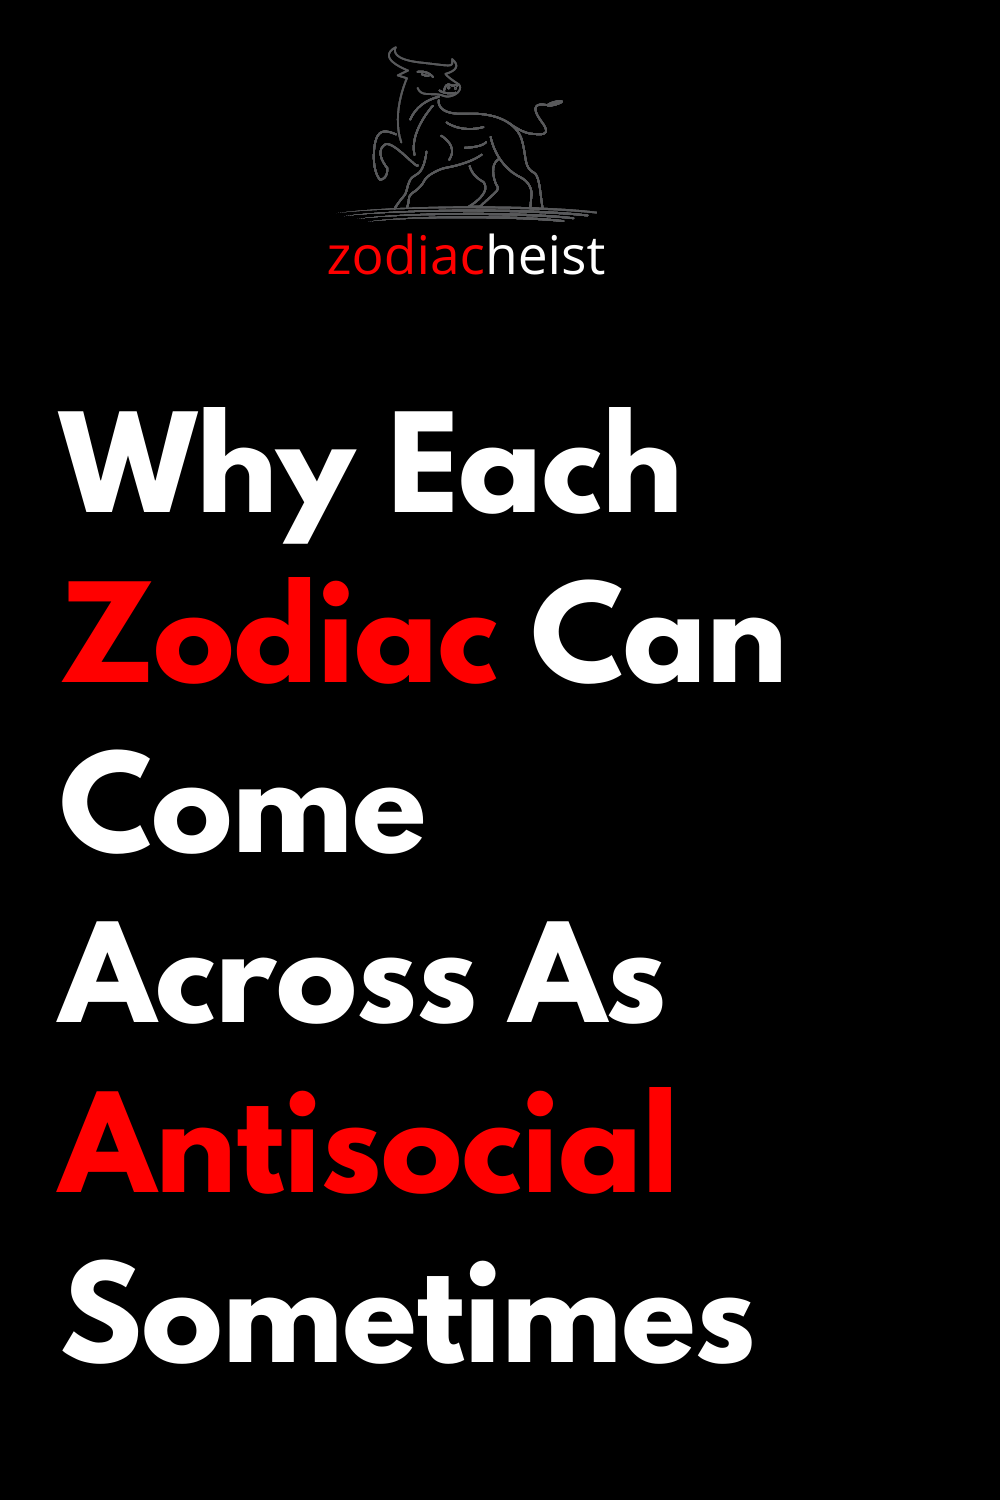 Why Each Zodiac Can Come Across As Antisocial Sometimes